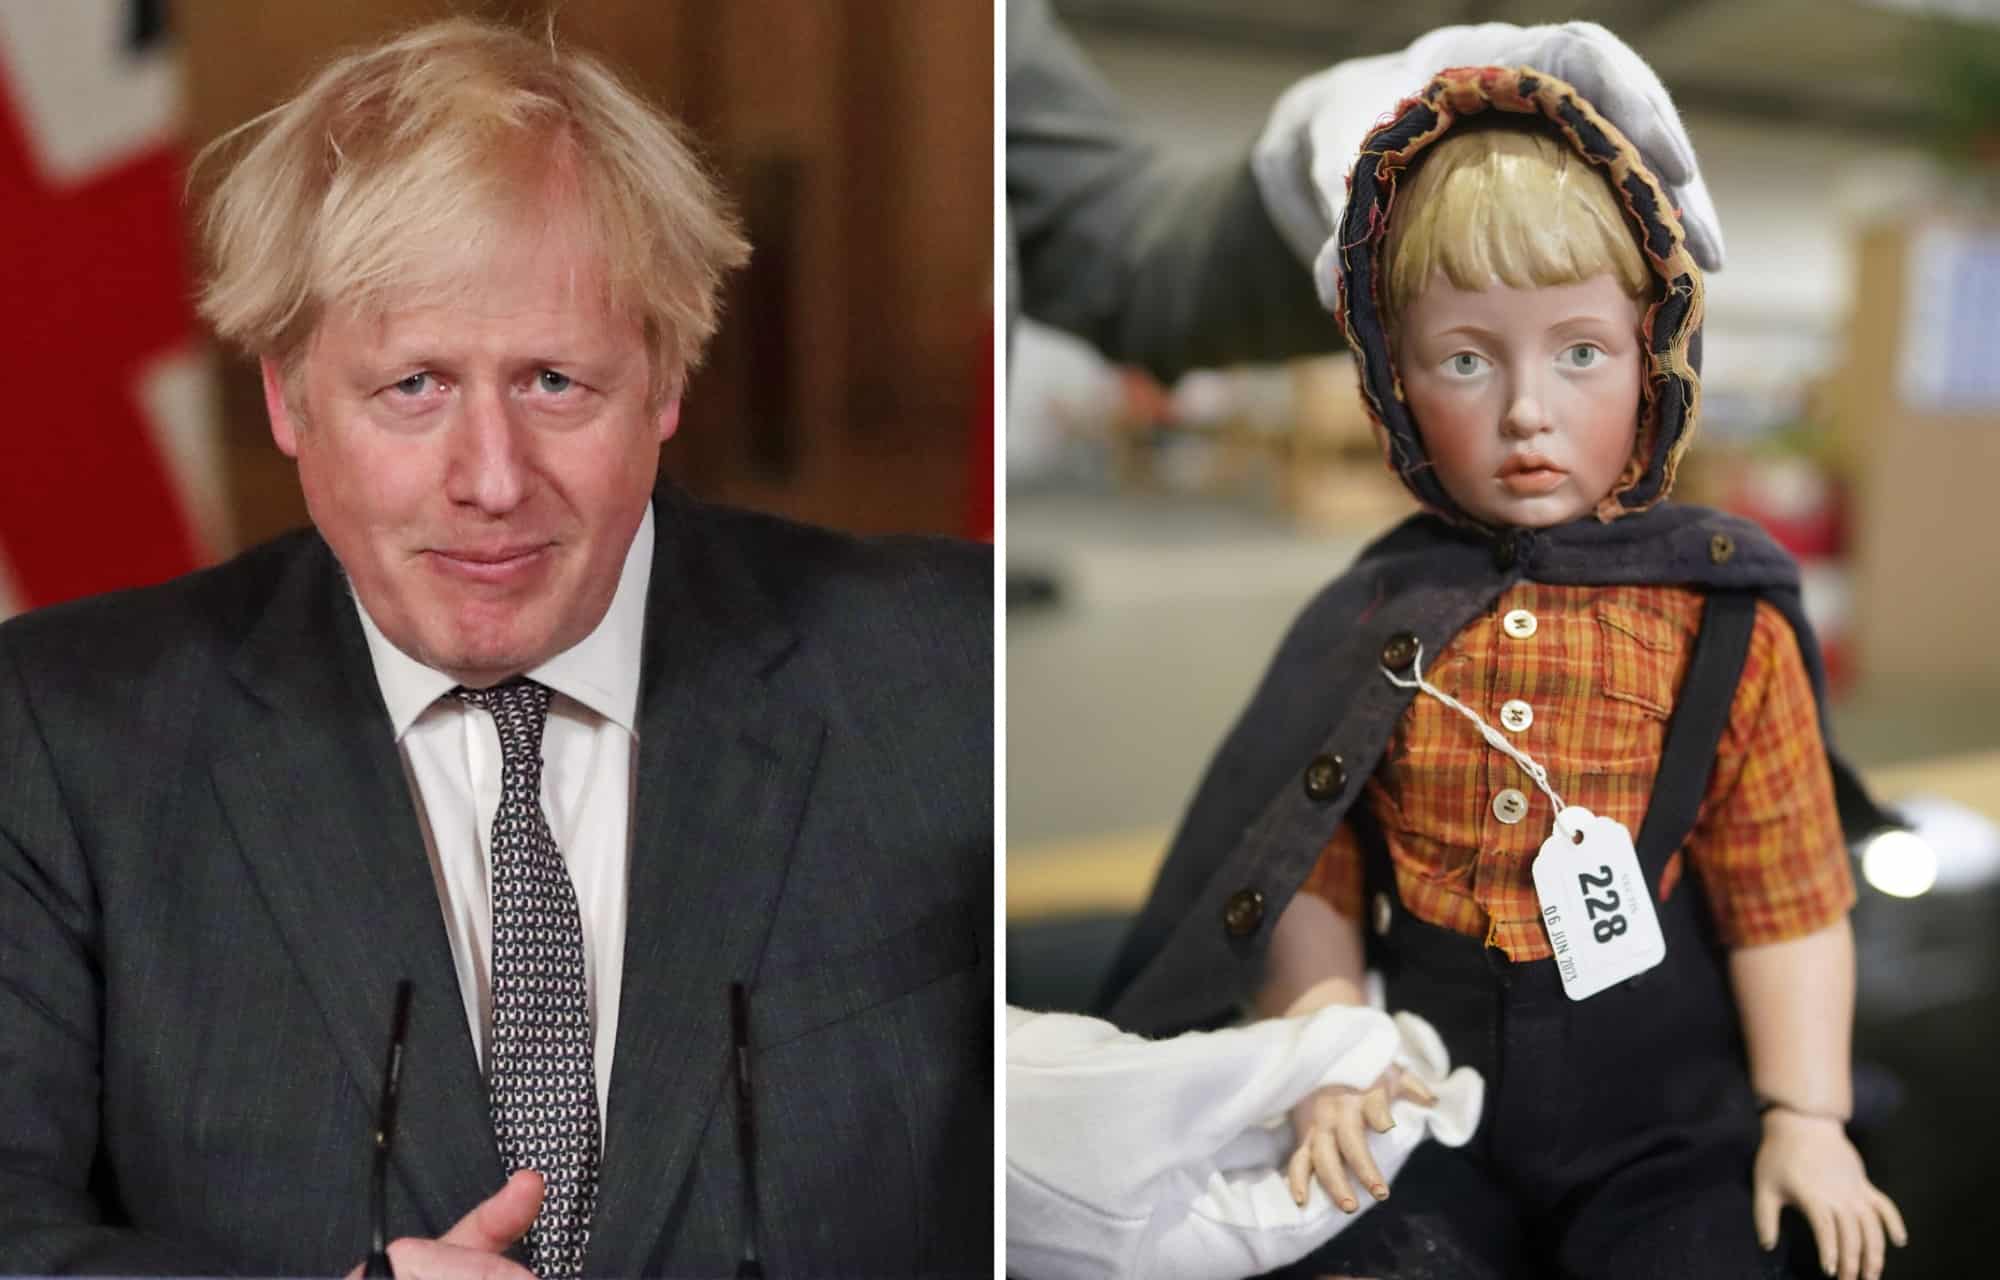 Doll with striking resemblance to a young Boris Johnson sells for £52k after being pulled out of a skip